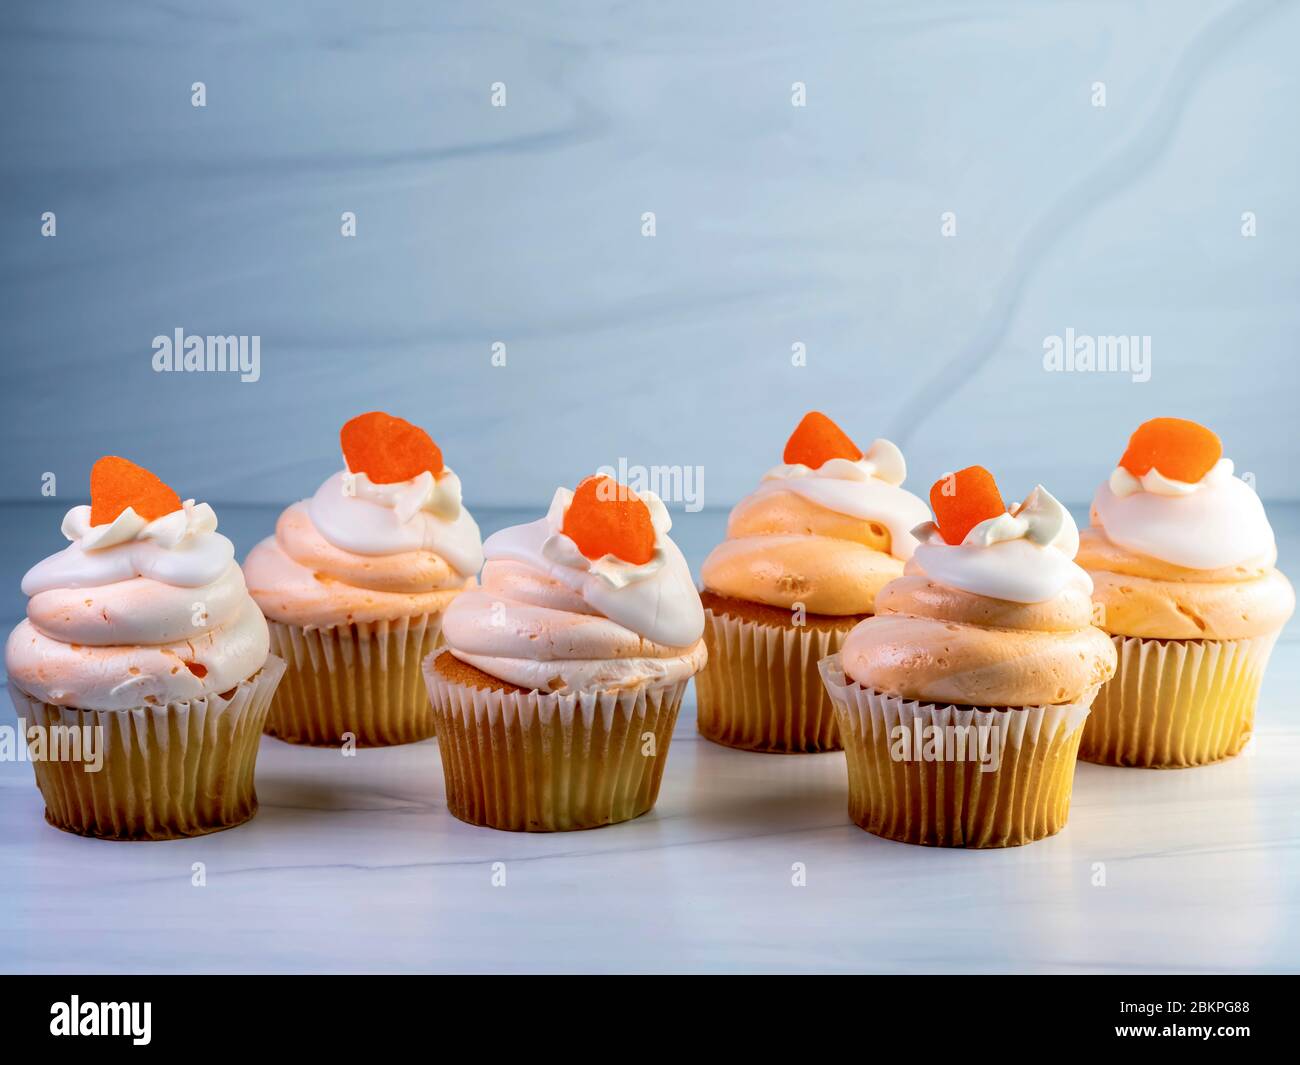 Six, 6, yellow cupcakes lined up with orange and white creamsicle frosting swirled up high and an orange gum drop candy on top.  Decadent delicious de Stock Photo